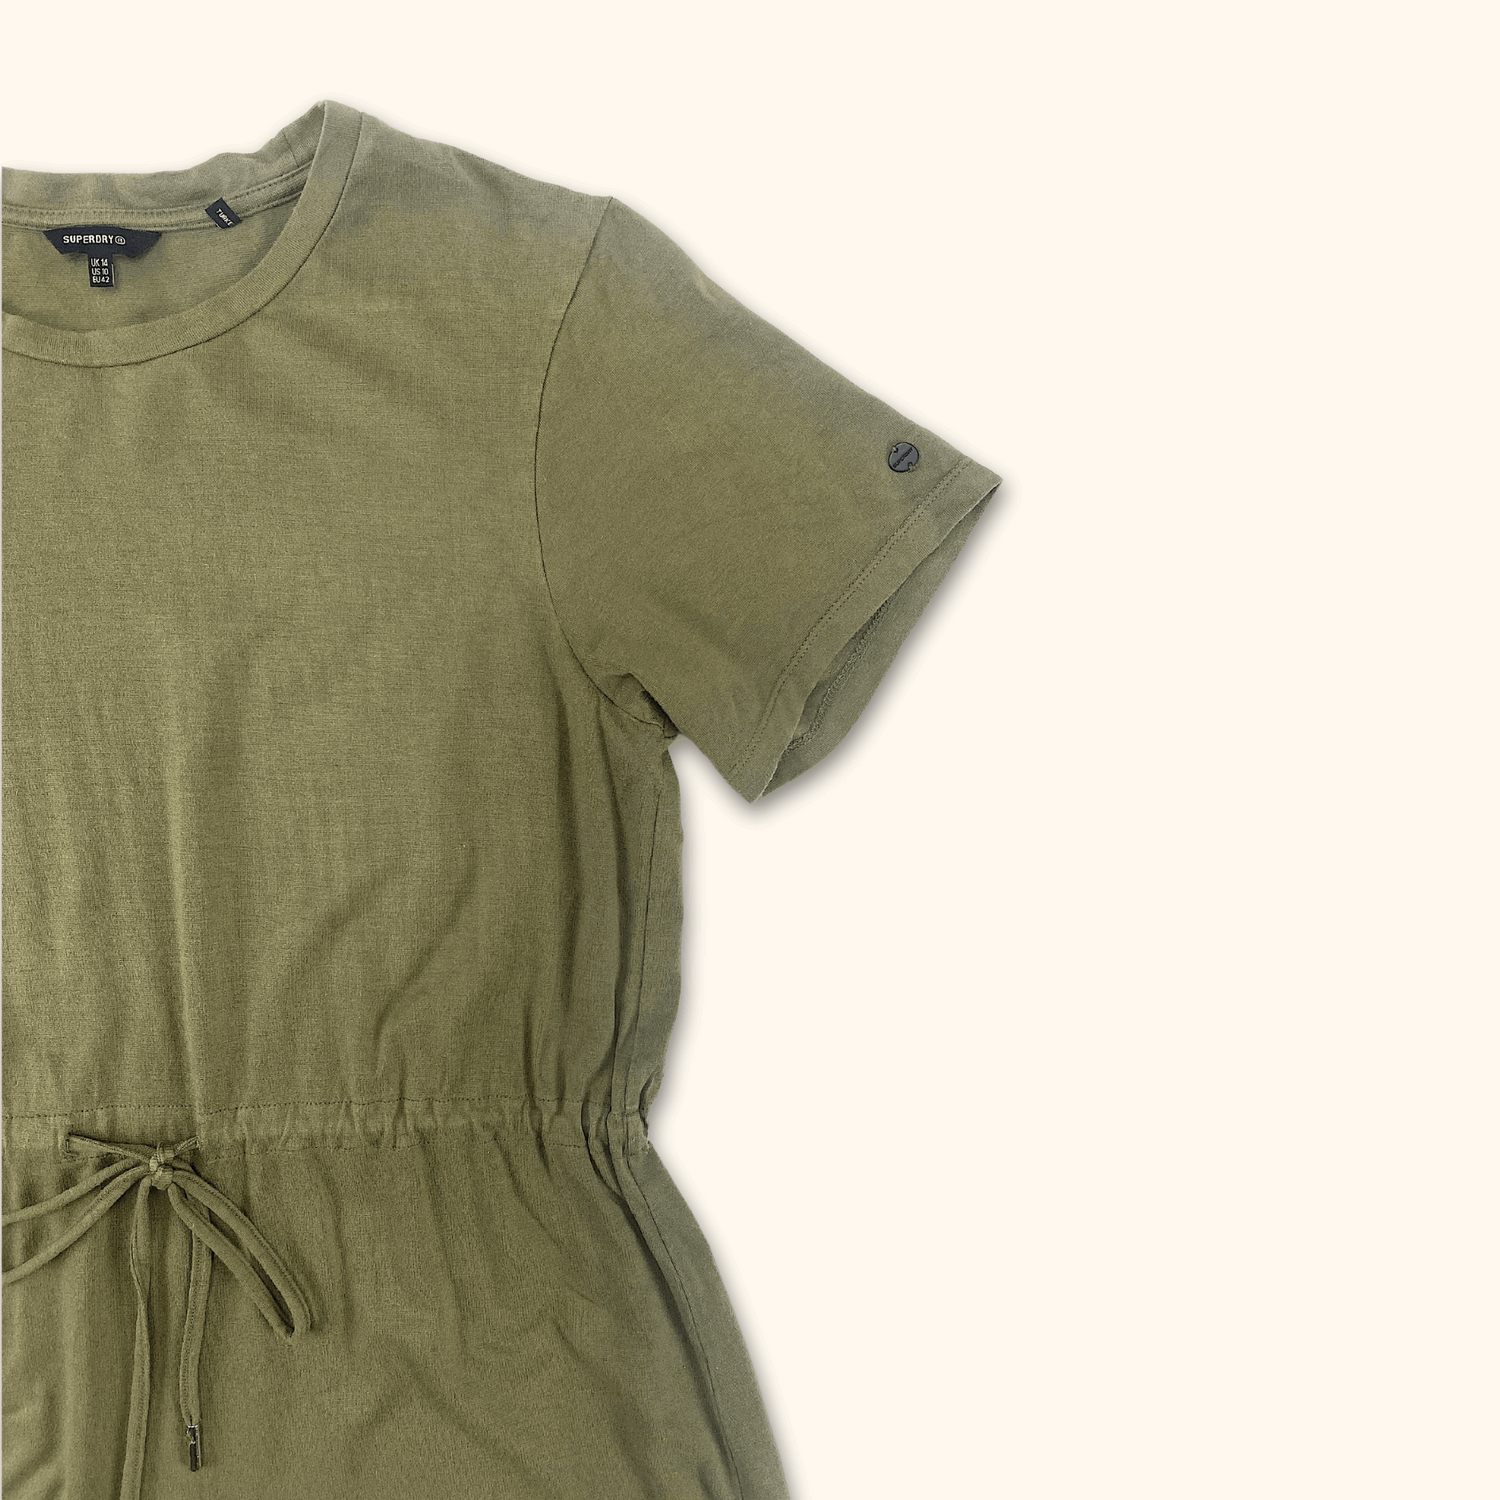 Superdry Khaki Green Jersey Dress with Drawstring - Size 14 - Superdry - Dresses